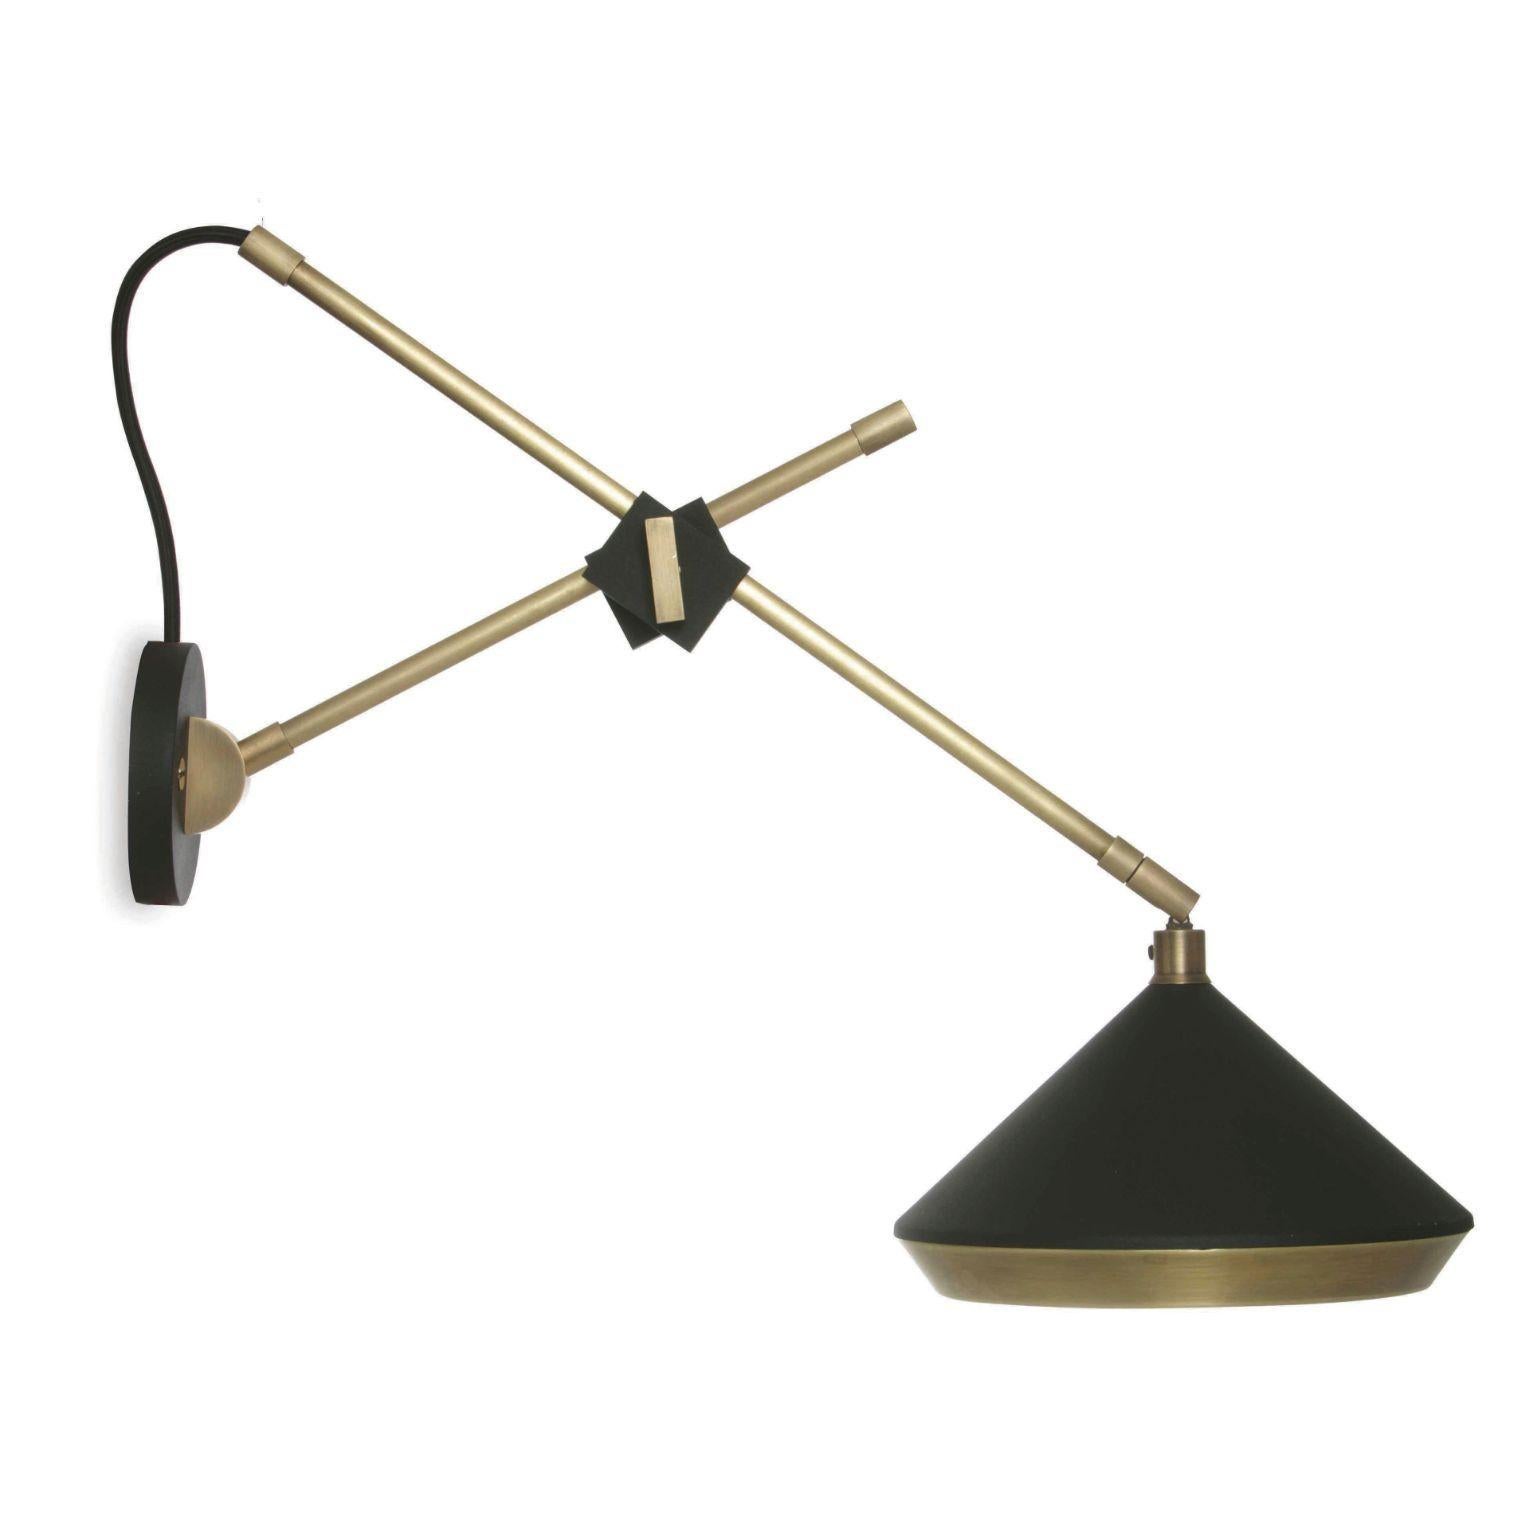 Shear wall light - brass - black by Bert Frank
Dimensions: 40 x 20 x 46 cm
Materials: Brass

When Adam Yeats and Robbie Llewellyn founded Bert Frank in 2013 it was a meeting of minds and the start of a collaborative creative partnership with